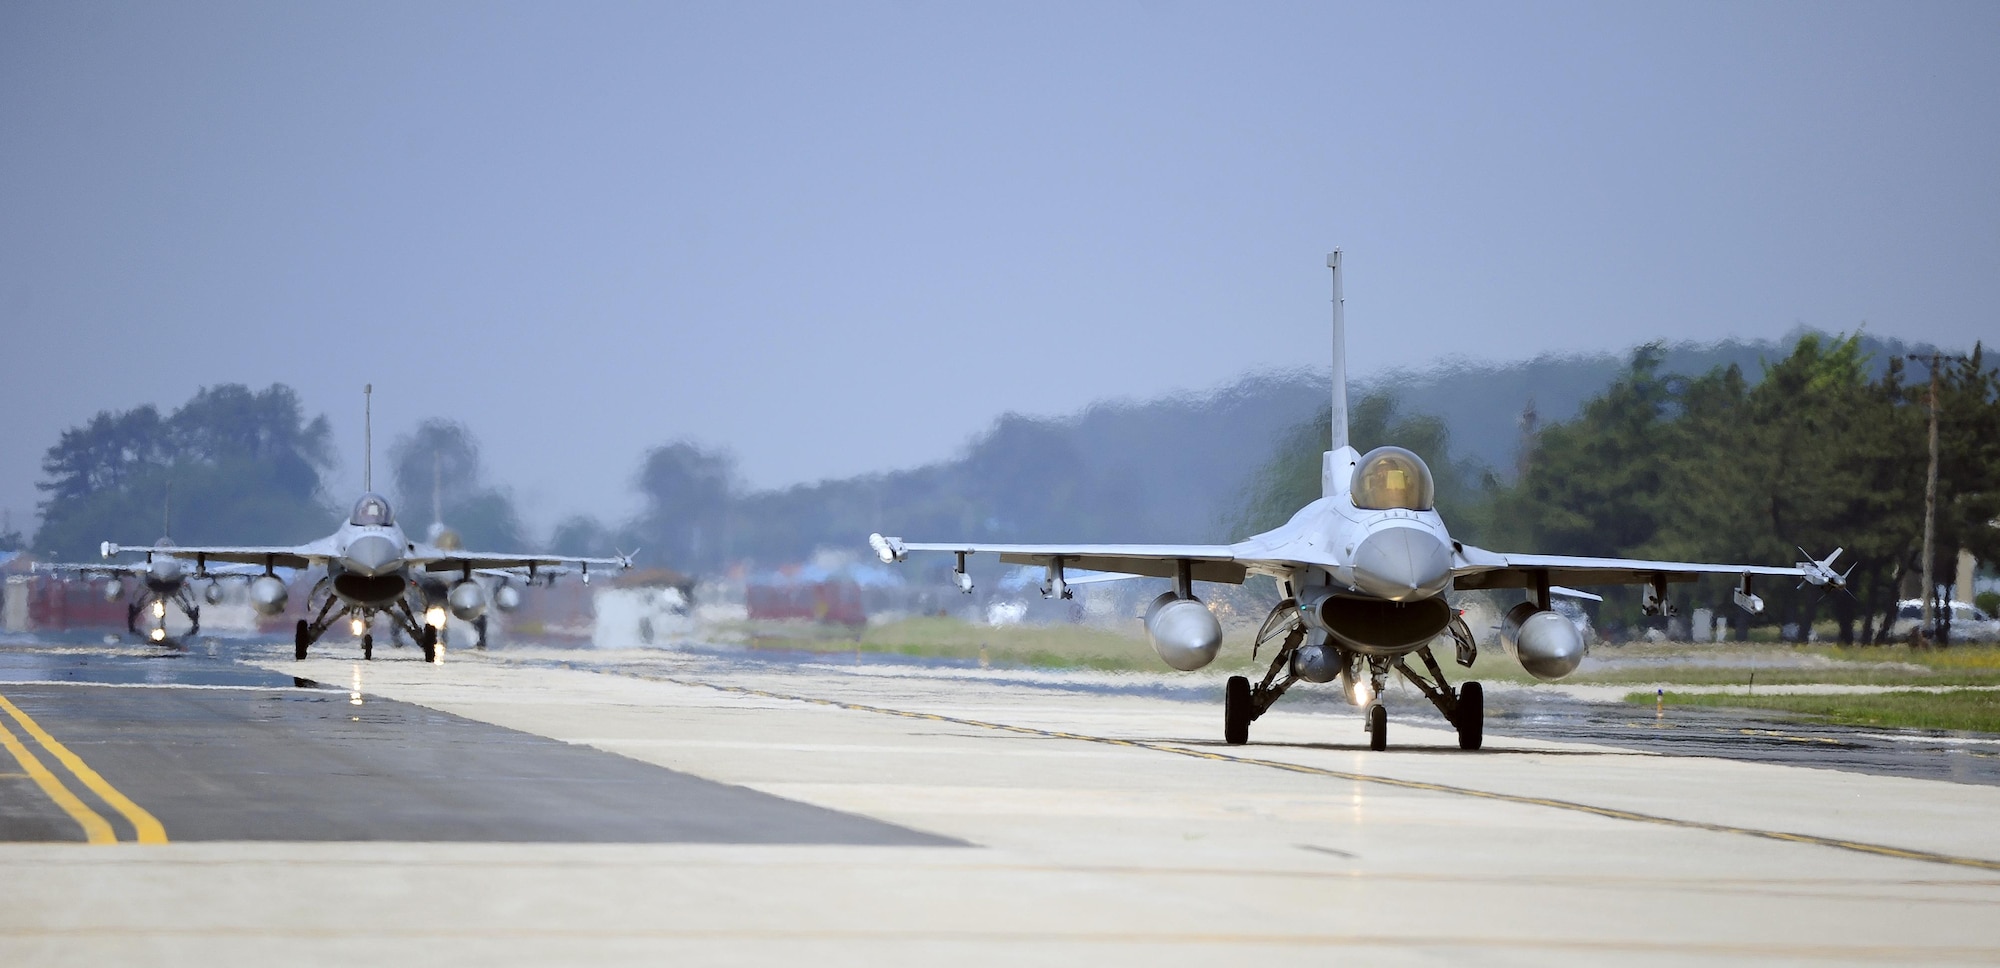 South Korean air force F-16 Fighting Falcons from the 123rd Tactical Fighter Squadron arrive at Kunsan Air Base, South Korea, for exercise Buddy Wing 15-4, June 1, 2015. Buddy Wing exercises are held multiple times throughout the year at various U.S. and South Korean air force bases to sharpen combined air combat tactics on the peninsula. (U.S. Air Force photo/Staff Sgt. Nick Wilson)